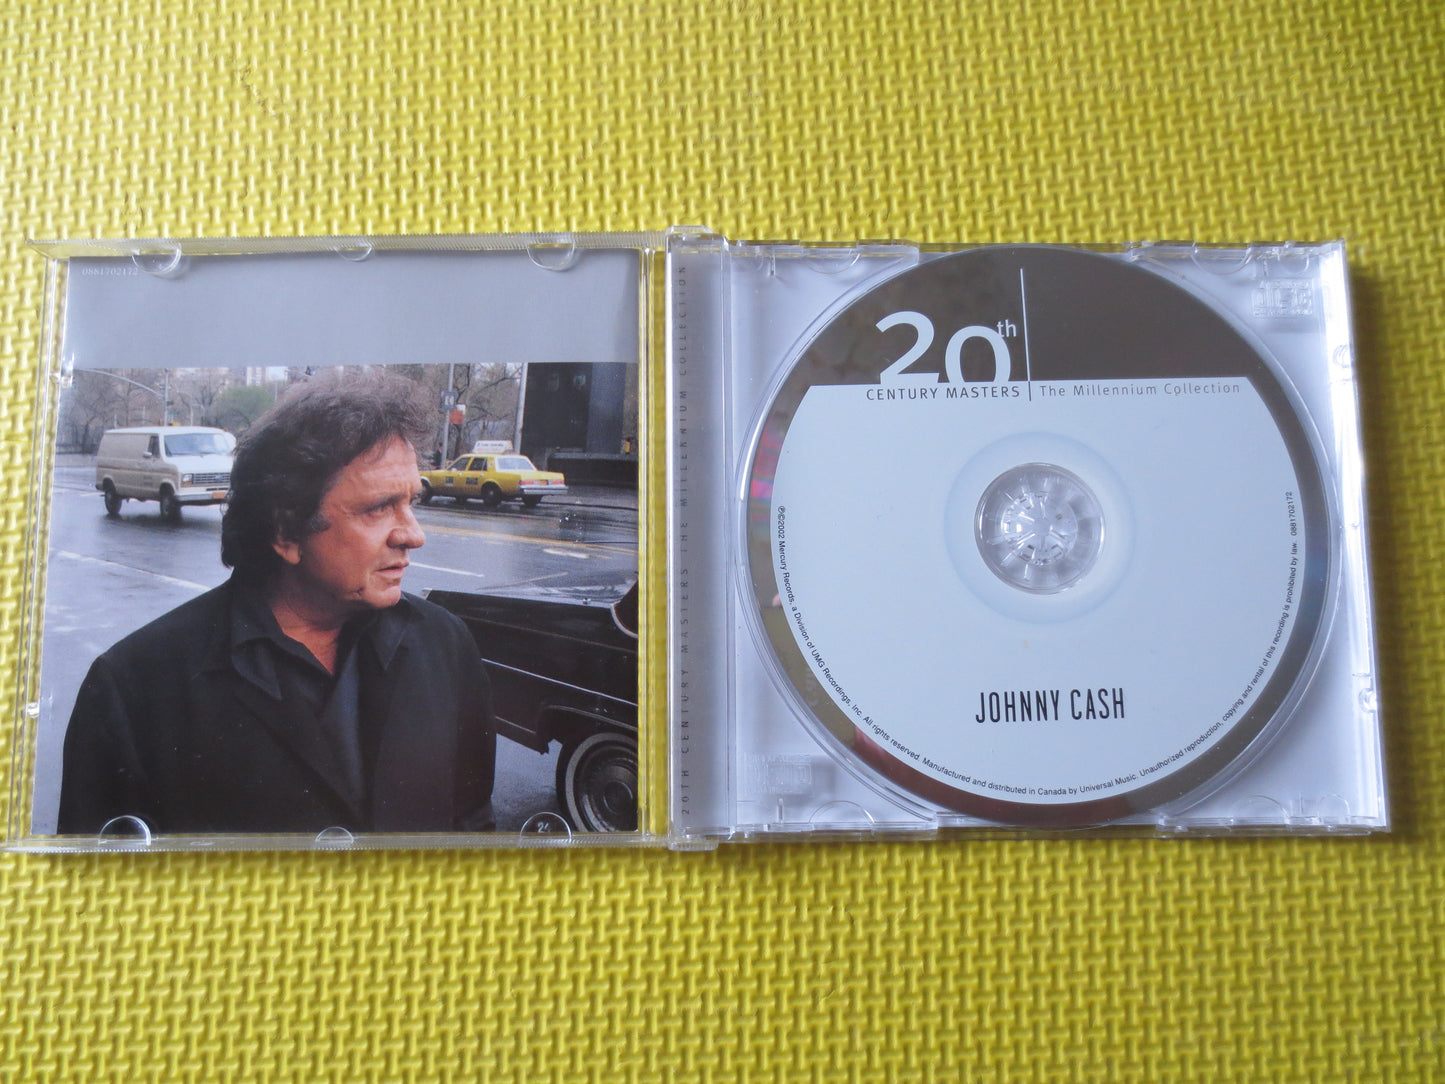 JOHNNY CASH, BEST of Cd, Johnny Cash Cd, Johnny Cash Album, Johnny Cash Songs, Country Cd, Classic Country, 2002 Compact Disc